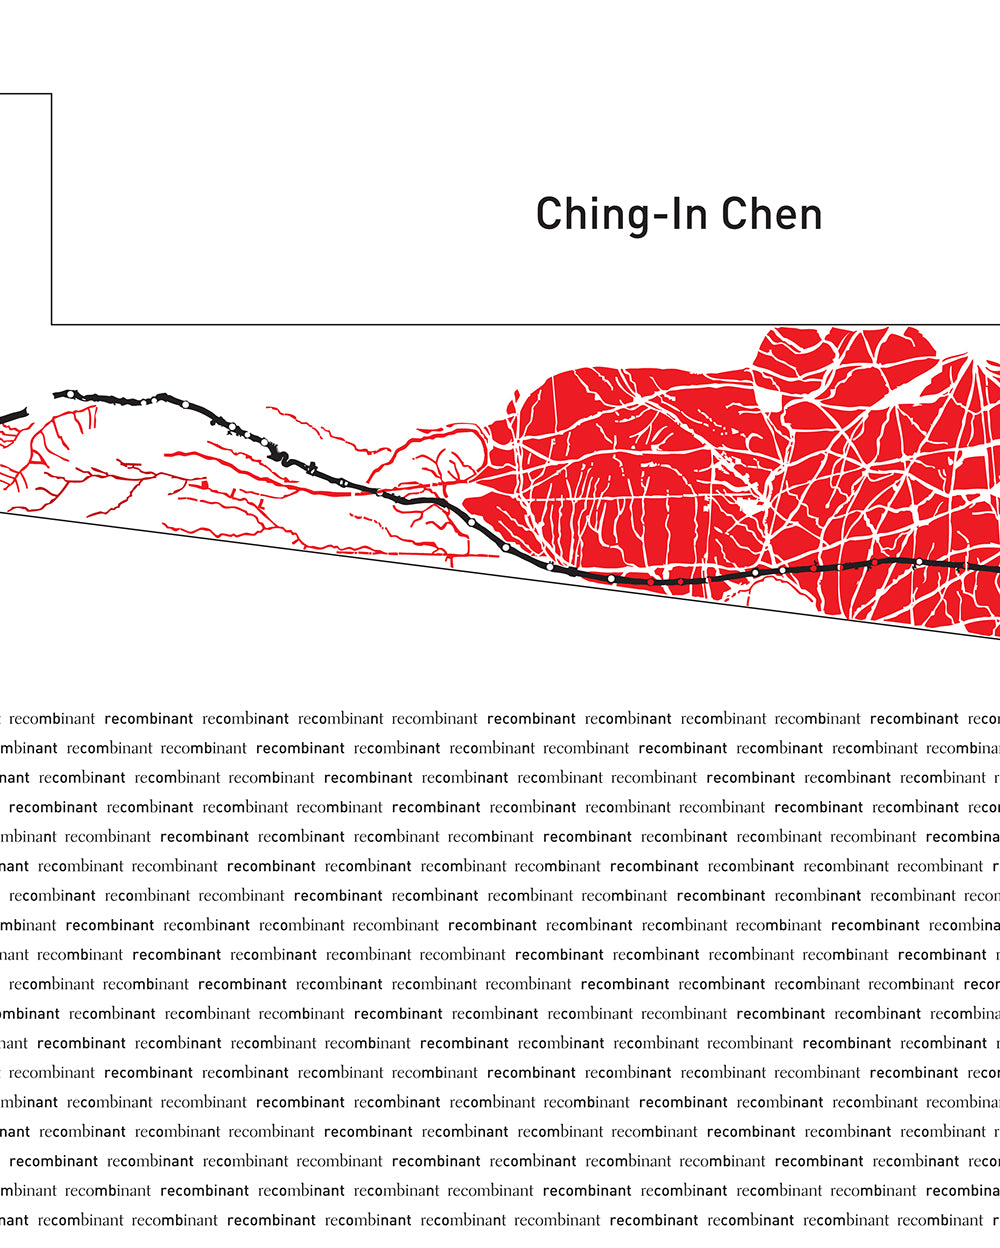 Chen, Ching-In: recombinant